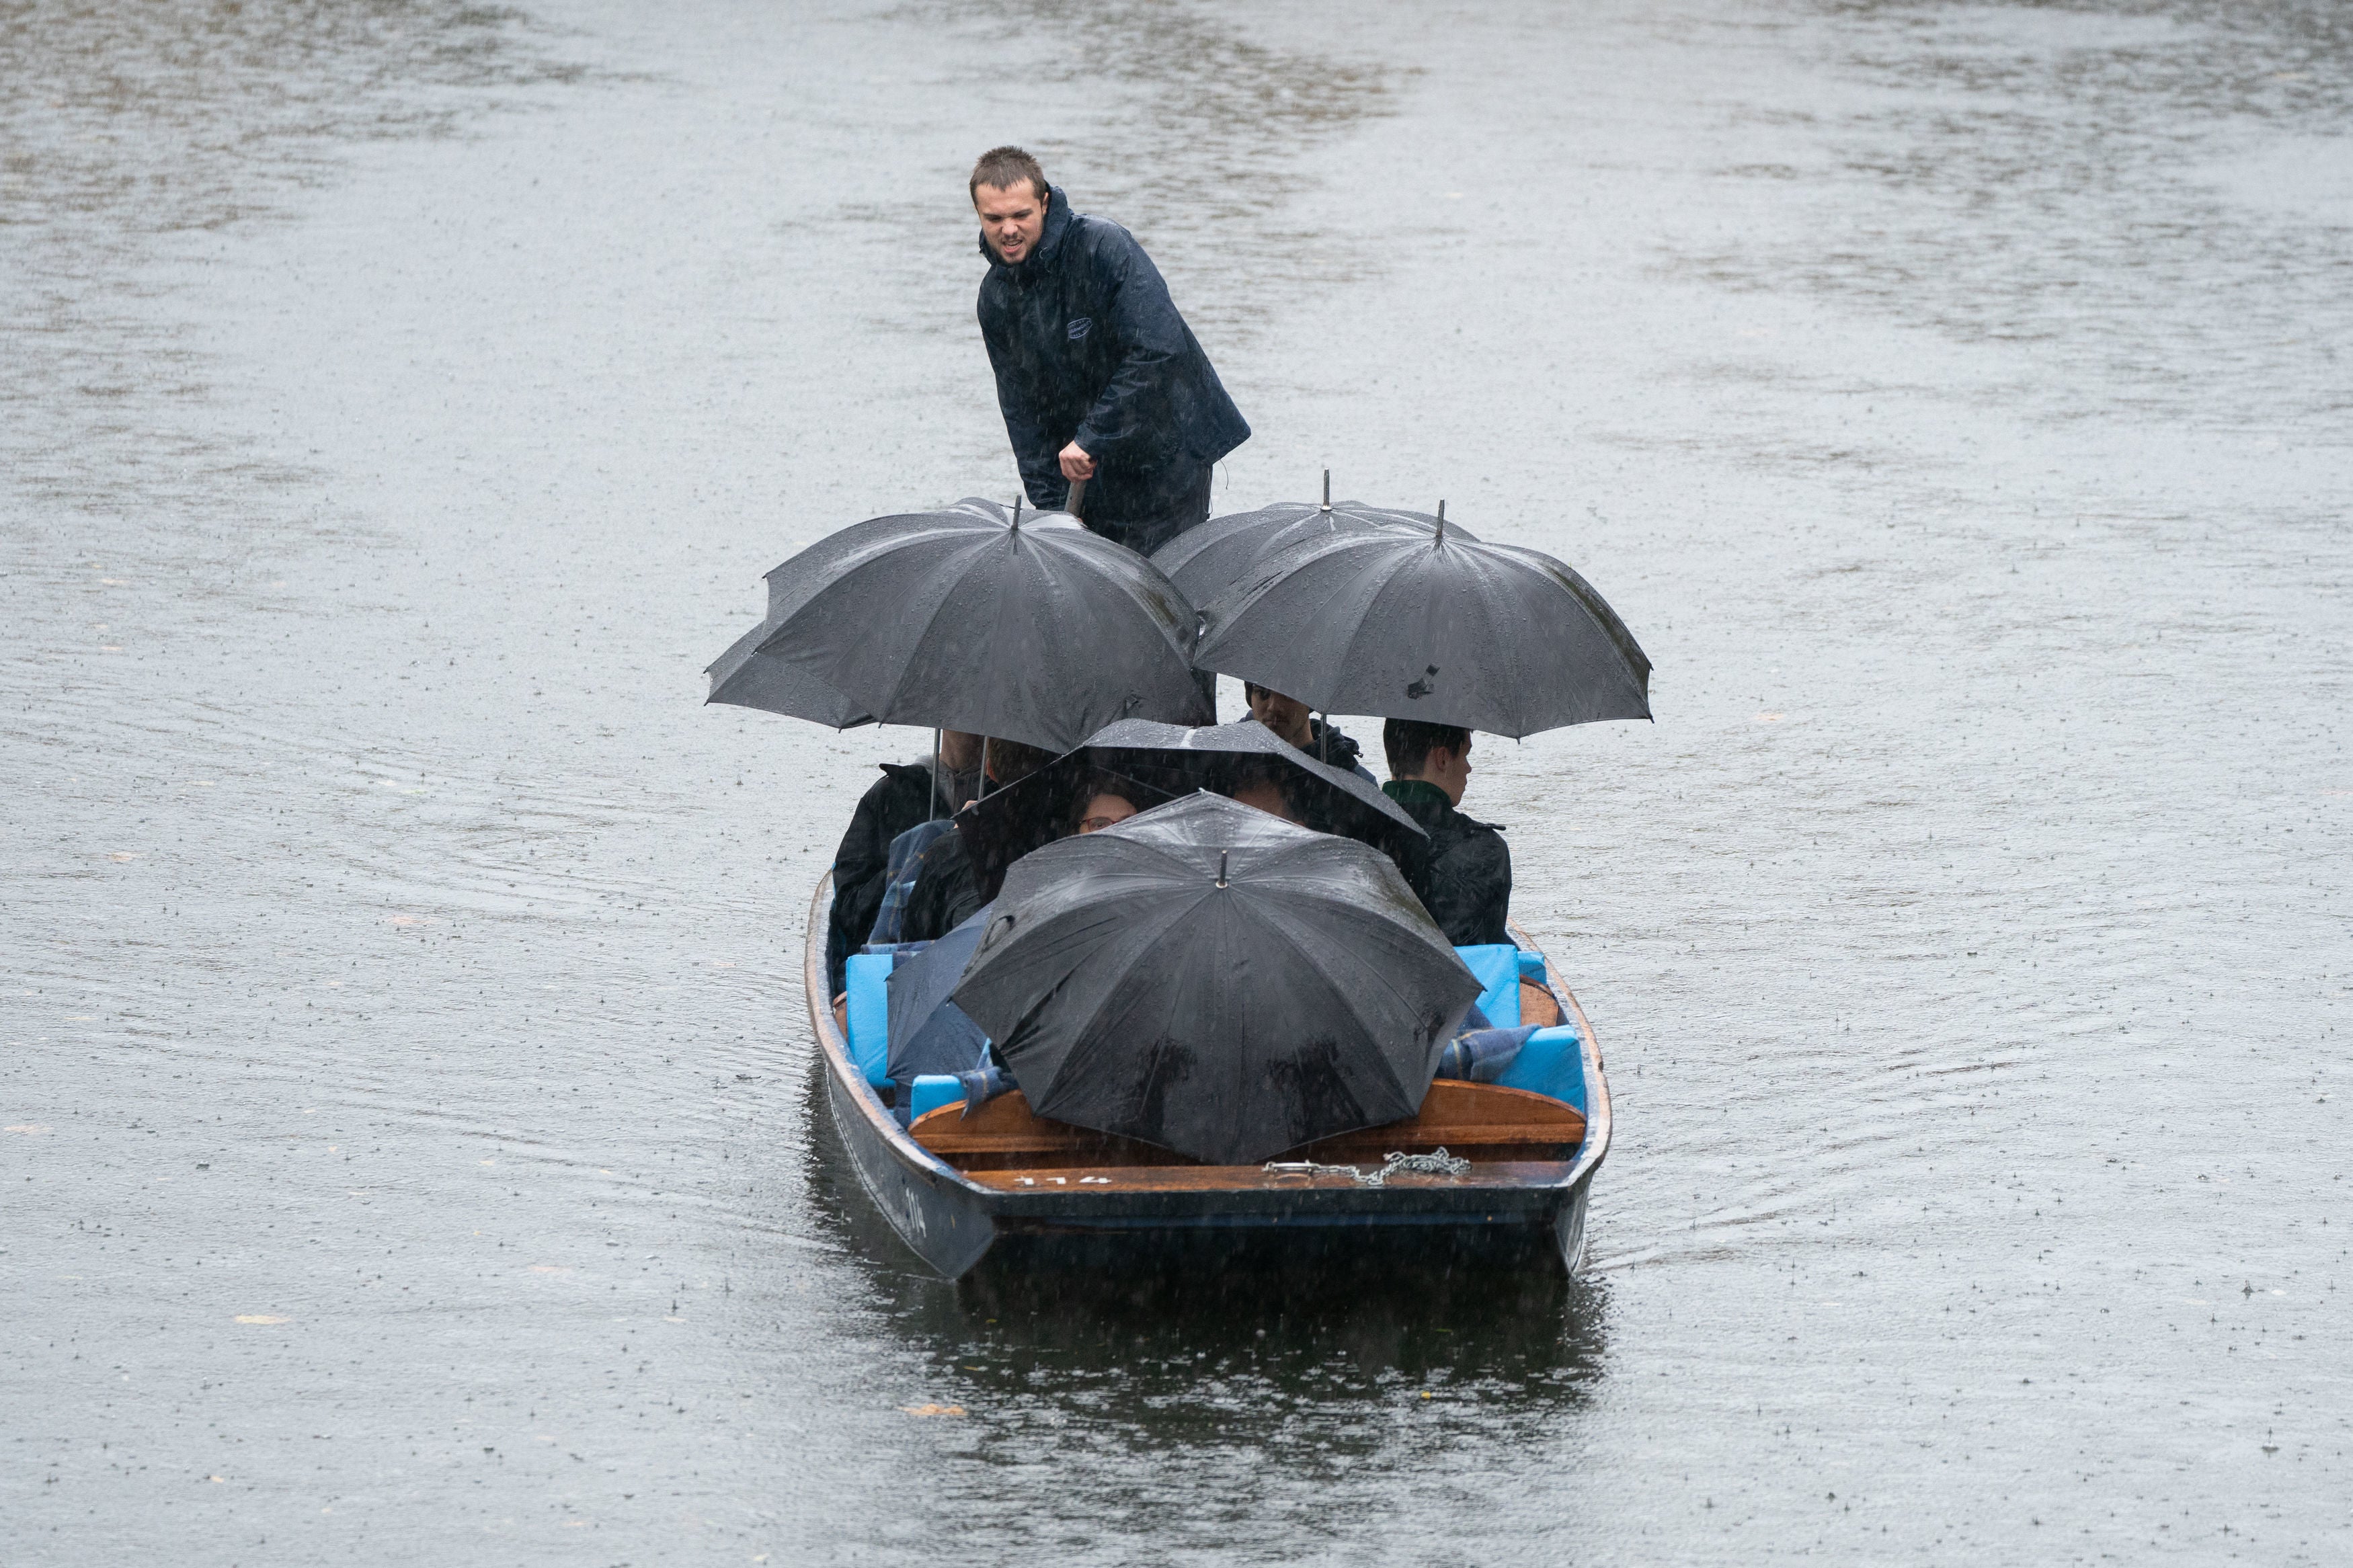 People shelter under umbrellas as they punt along the River Cam in Cambridge during a heavy rain shower